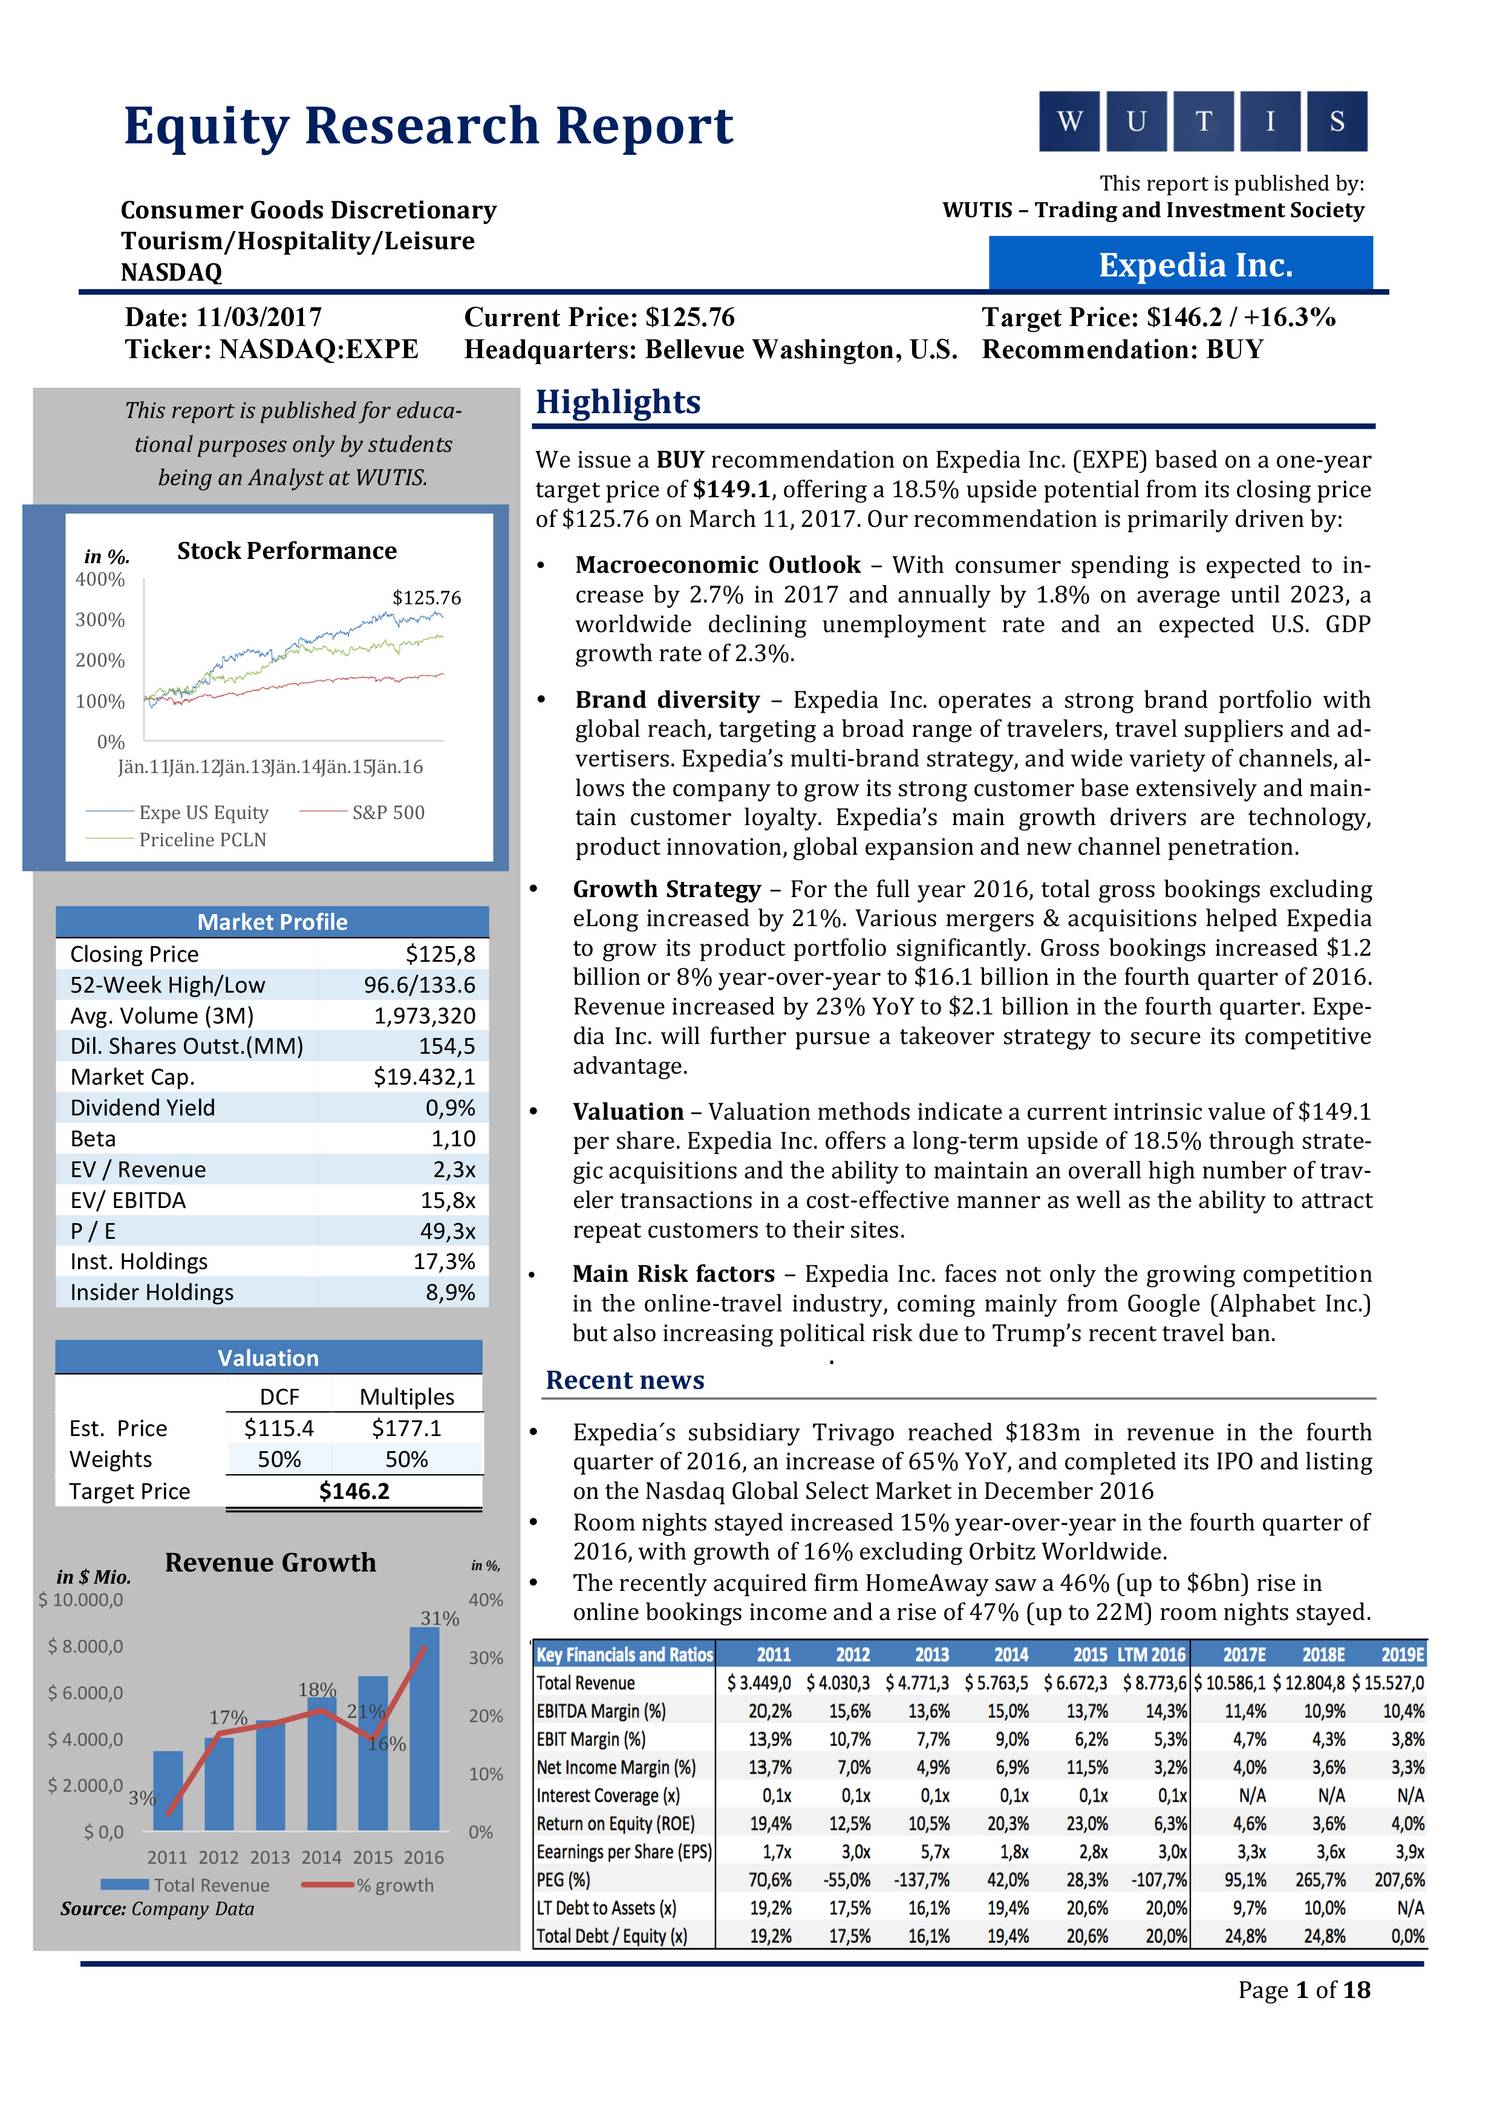 disney equity research report pdf